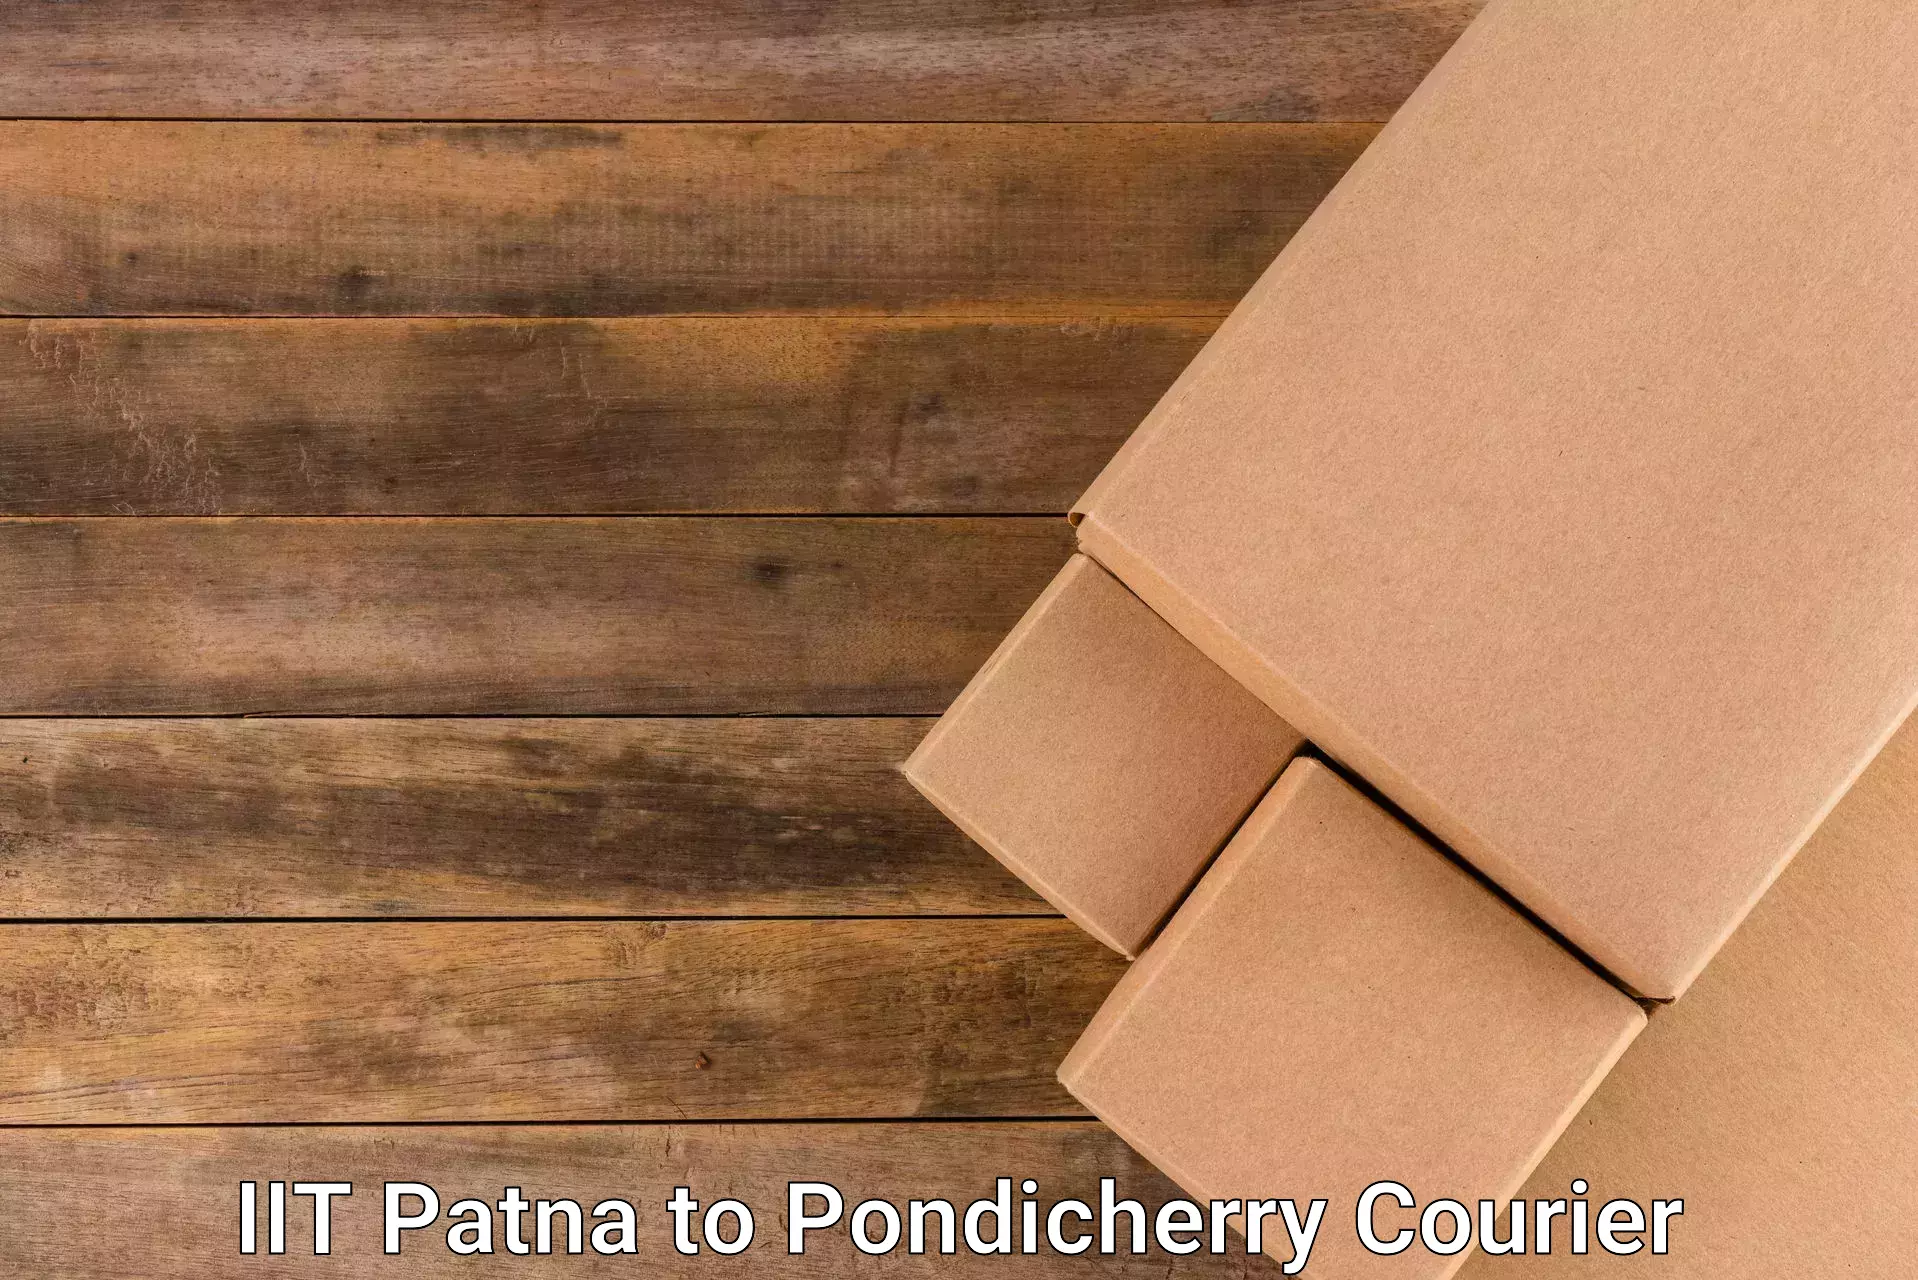 Online package tracking IIT Patna to Pondicherry